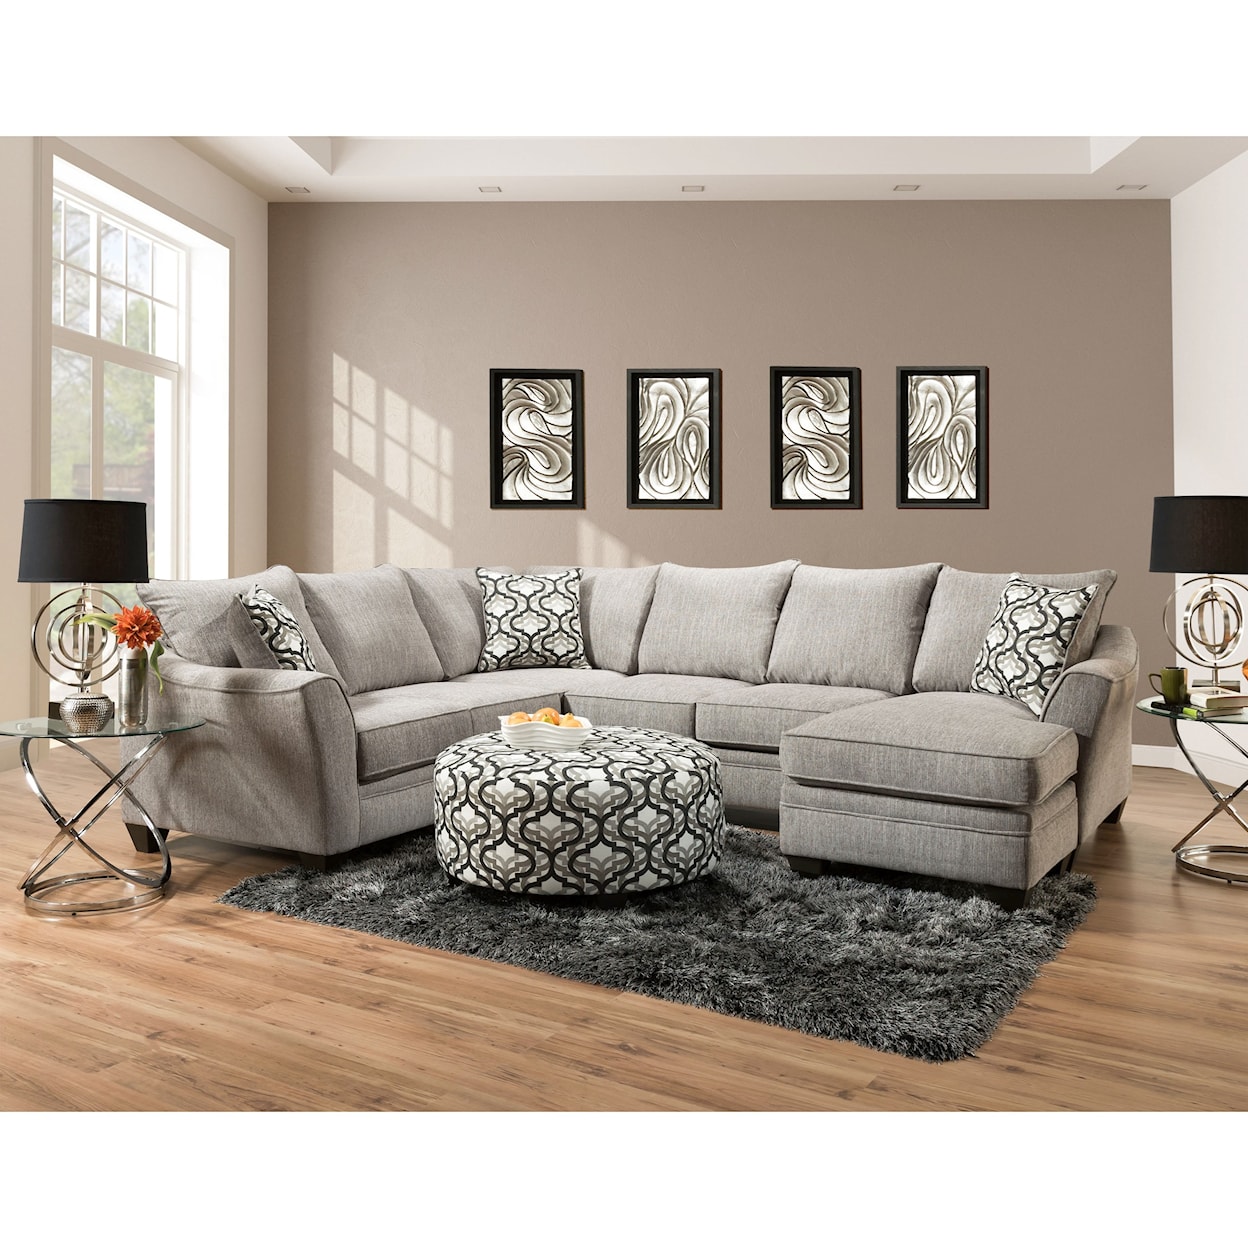 Peak Living 4810 5 Seat Sectional Sofa with Chaise